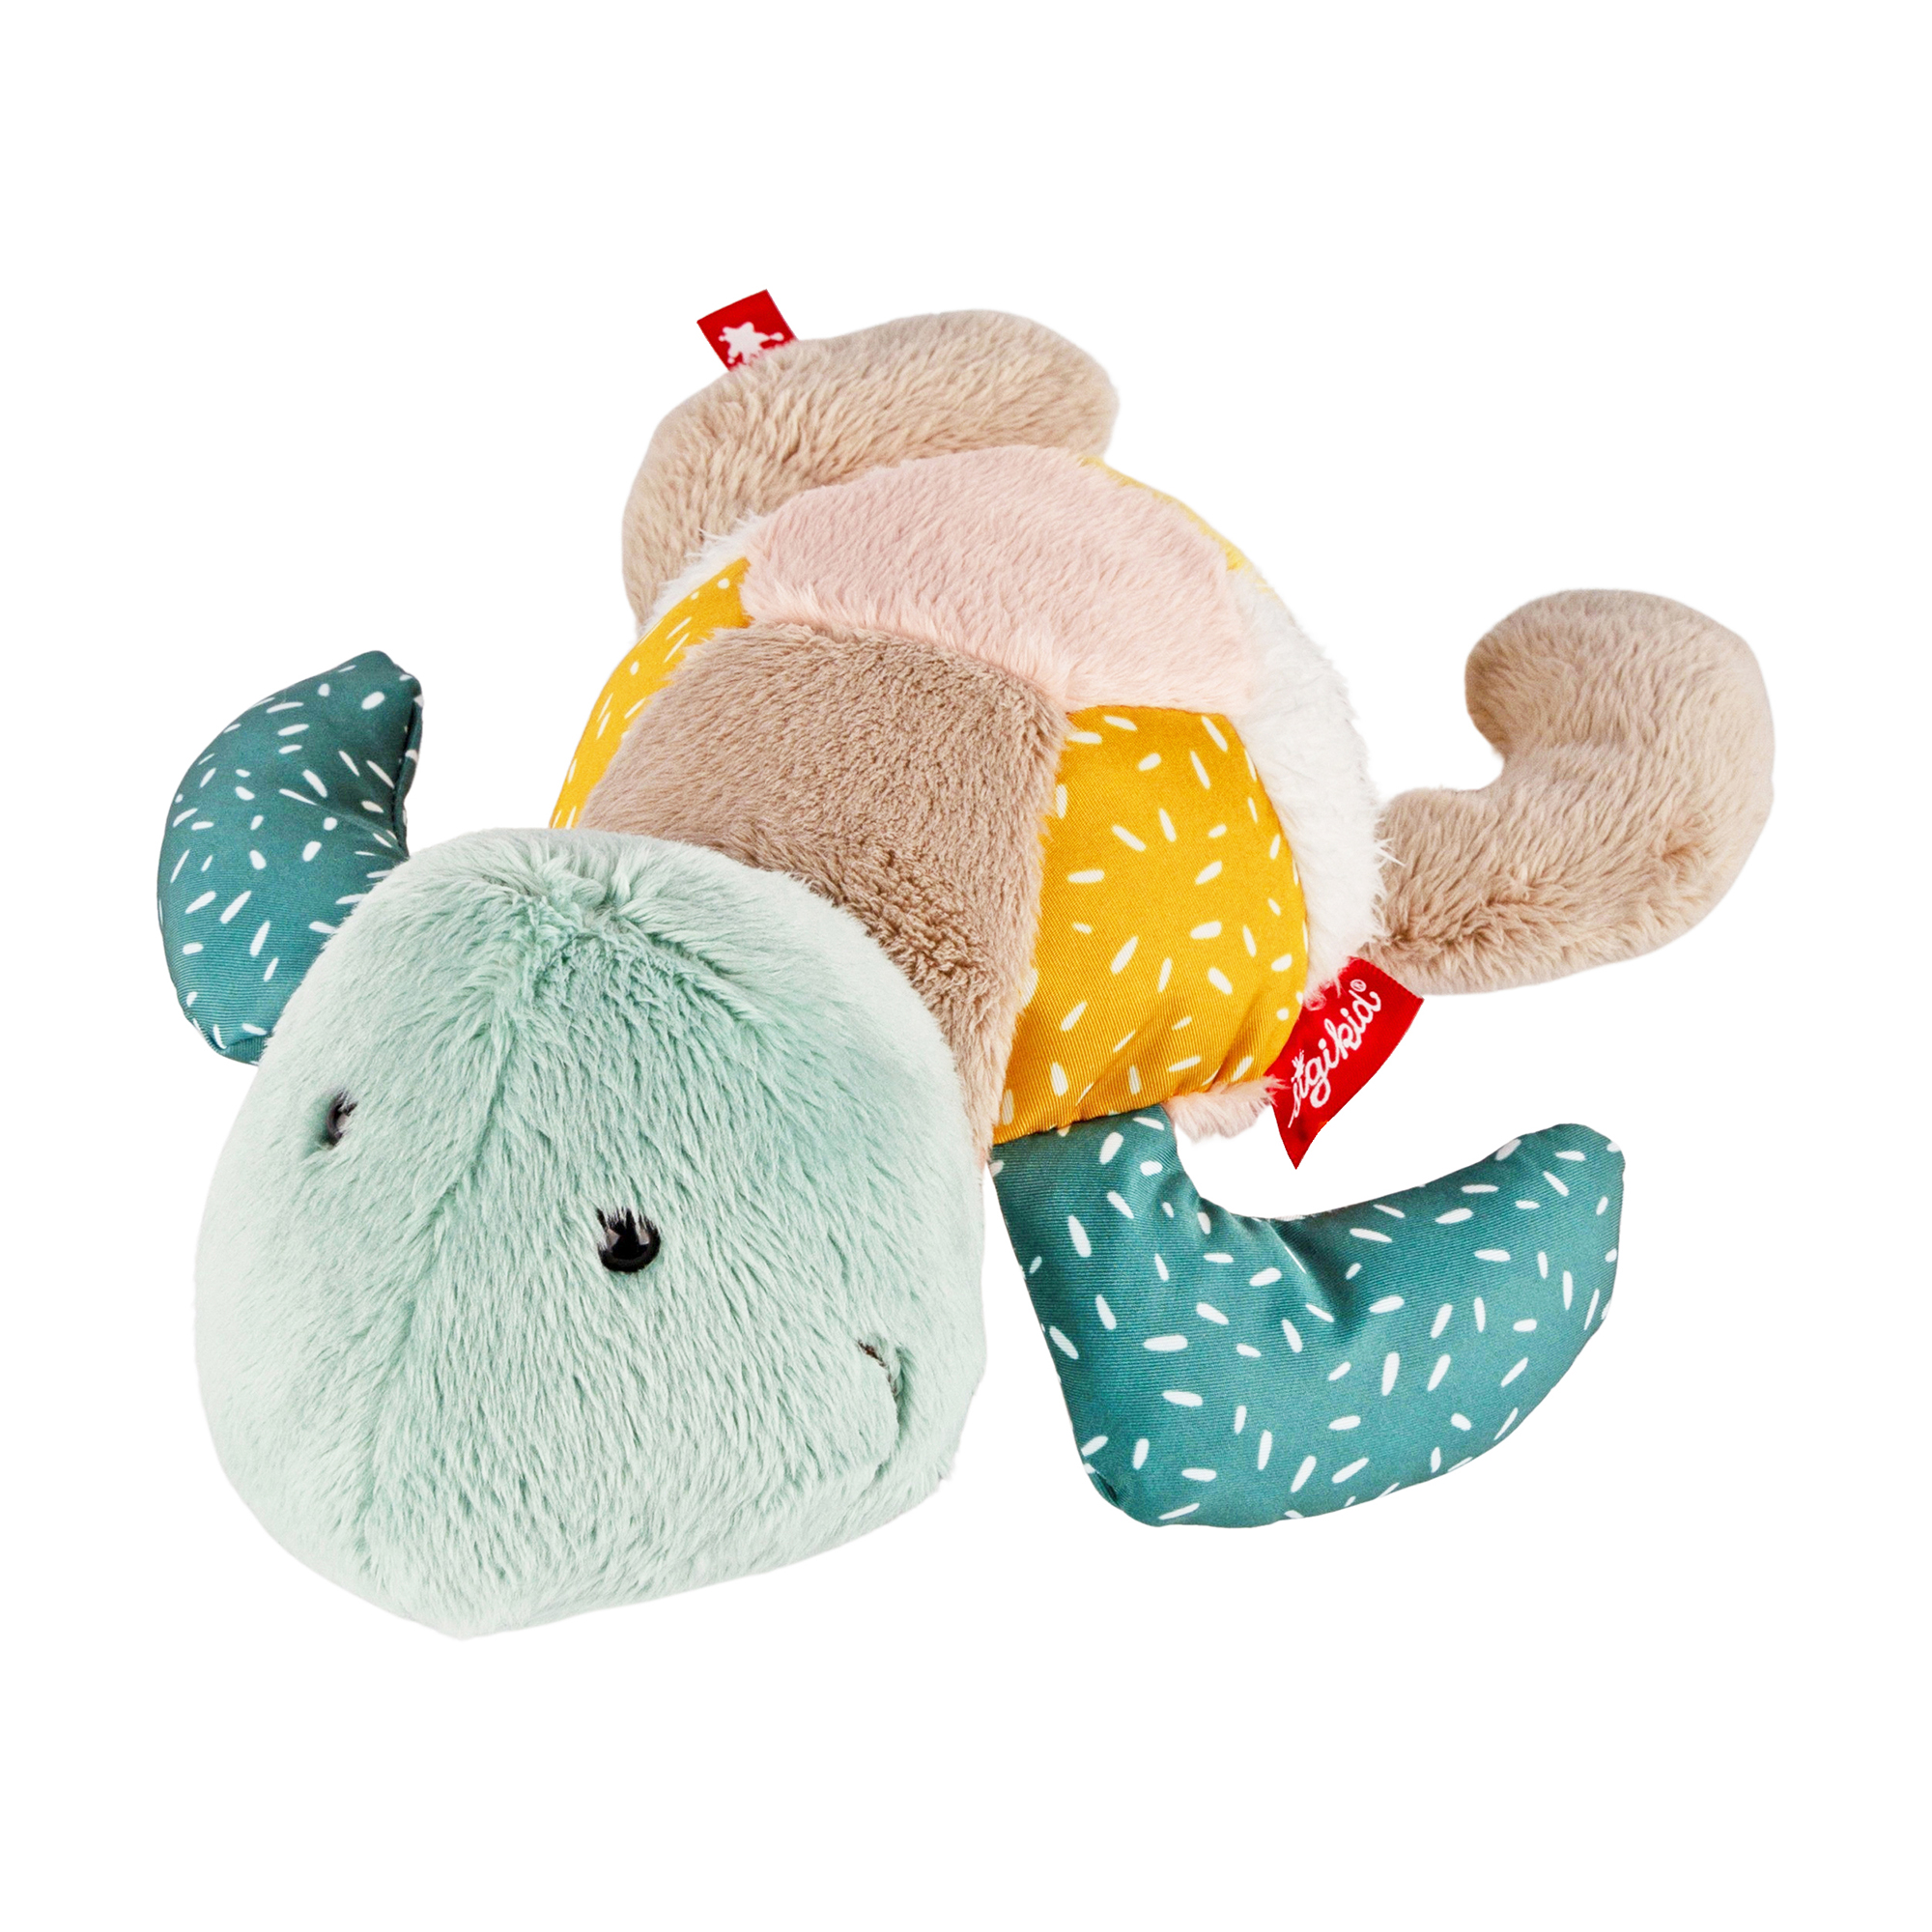 Plush toy turtle, Patchwork Sweety